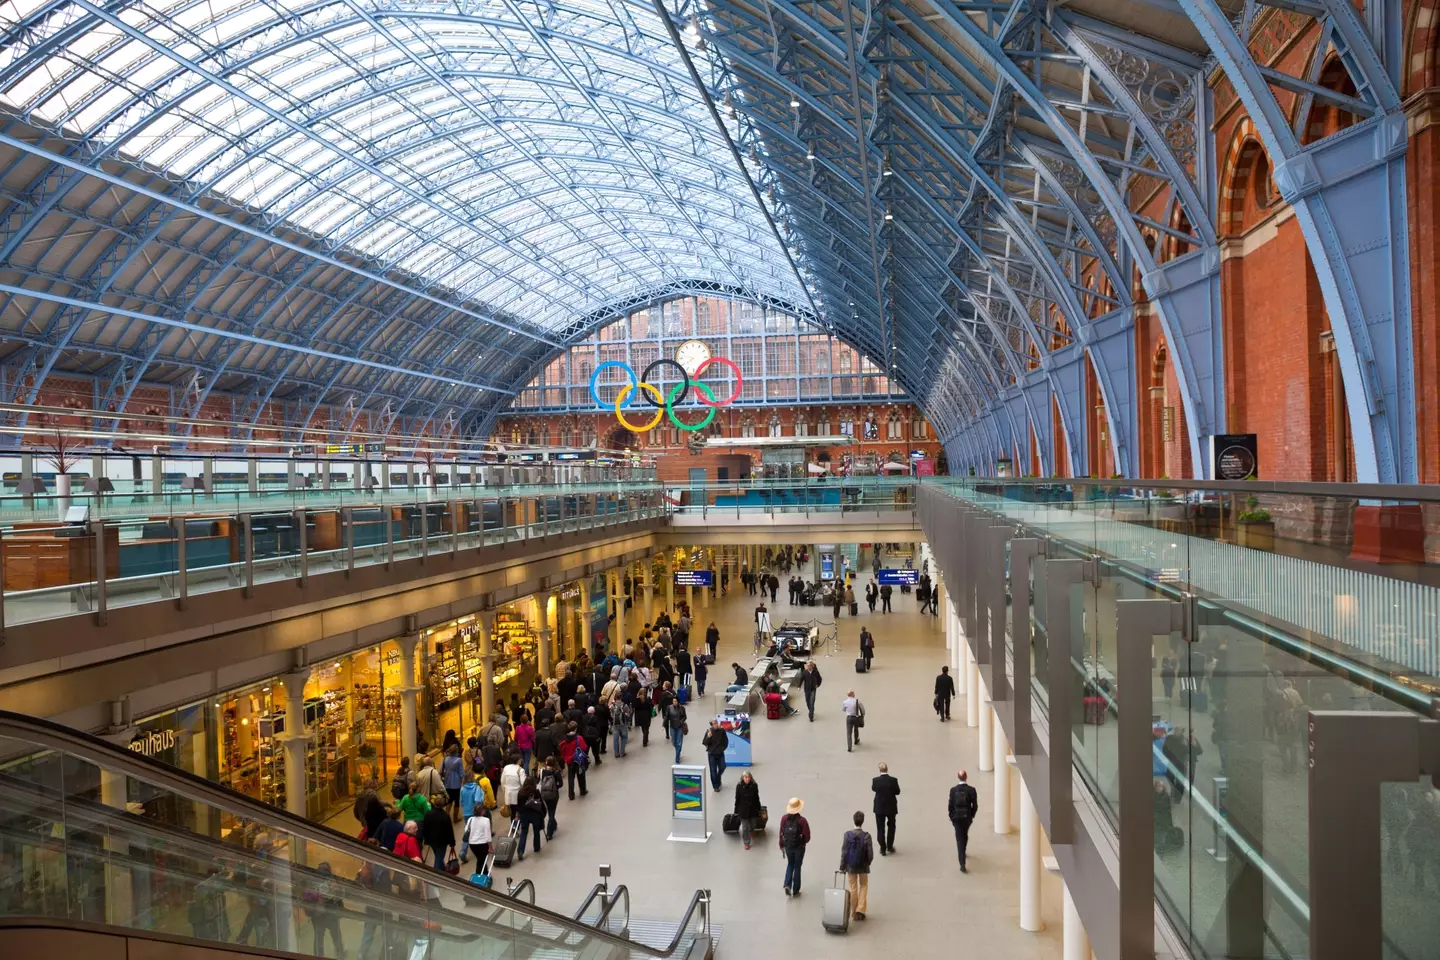 Eurostar has launched £39 tickets for certain destinations from London.